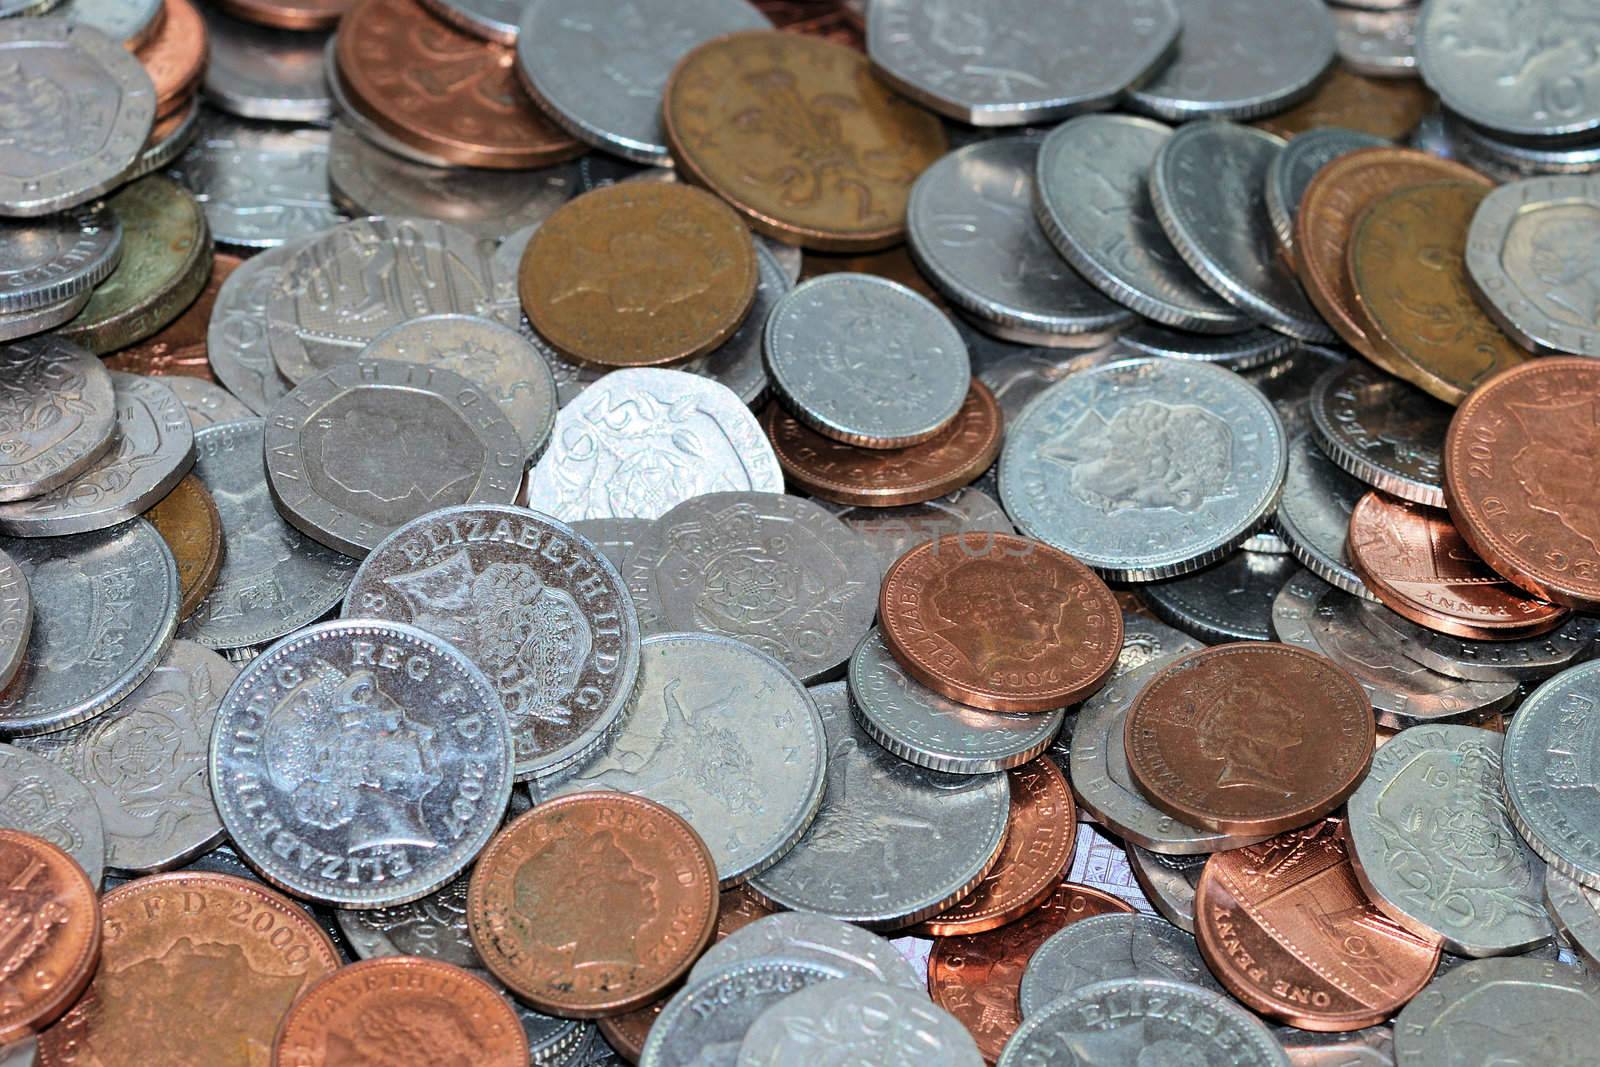 Large pile of coins